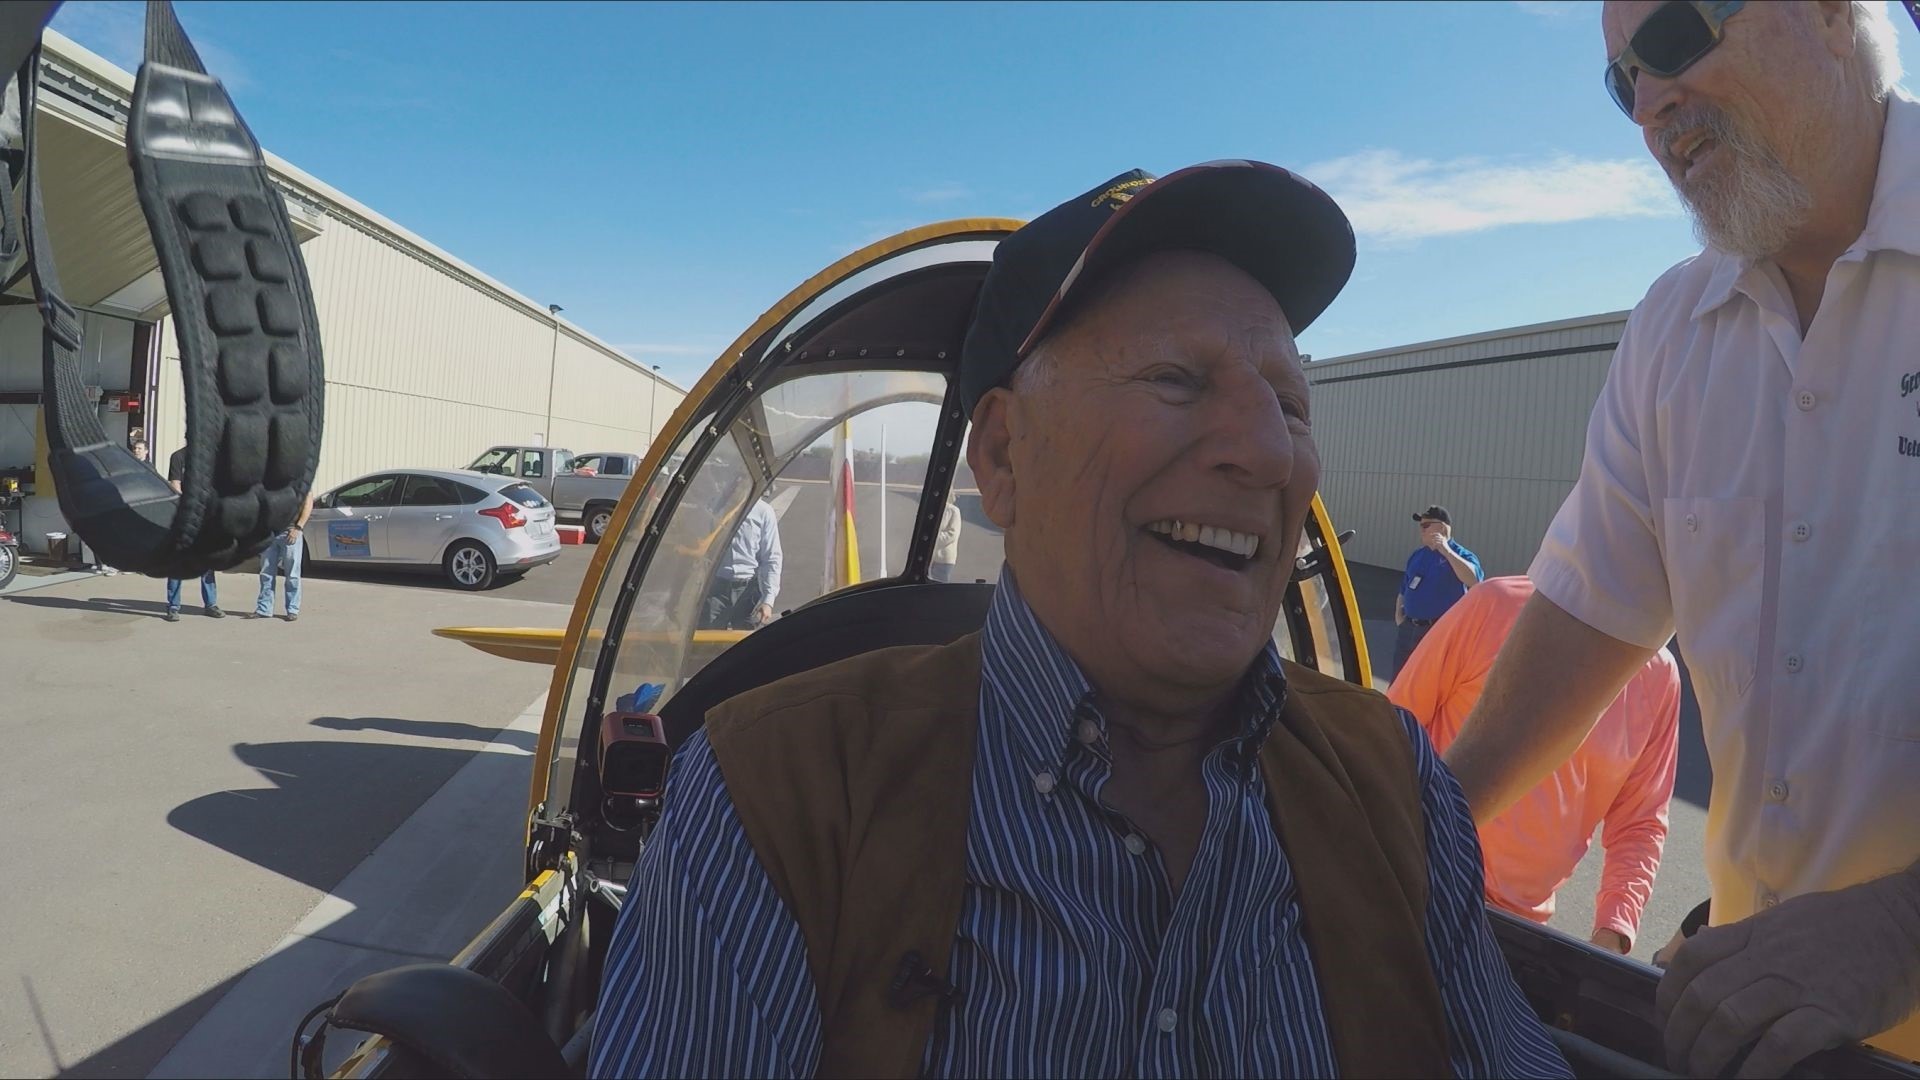 95-year-old World War II veteran, Jean Metcalf, got the chance to fly a piece of history when he got back into the cockpit of a historic plane. Metcalf's neighbor brought him to a Queen Creek runway to fly the skies again.